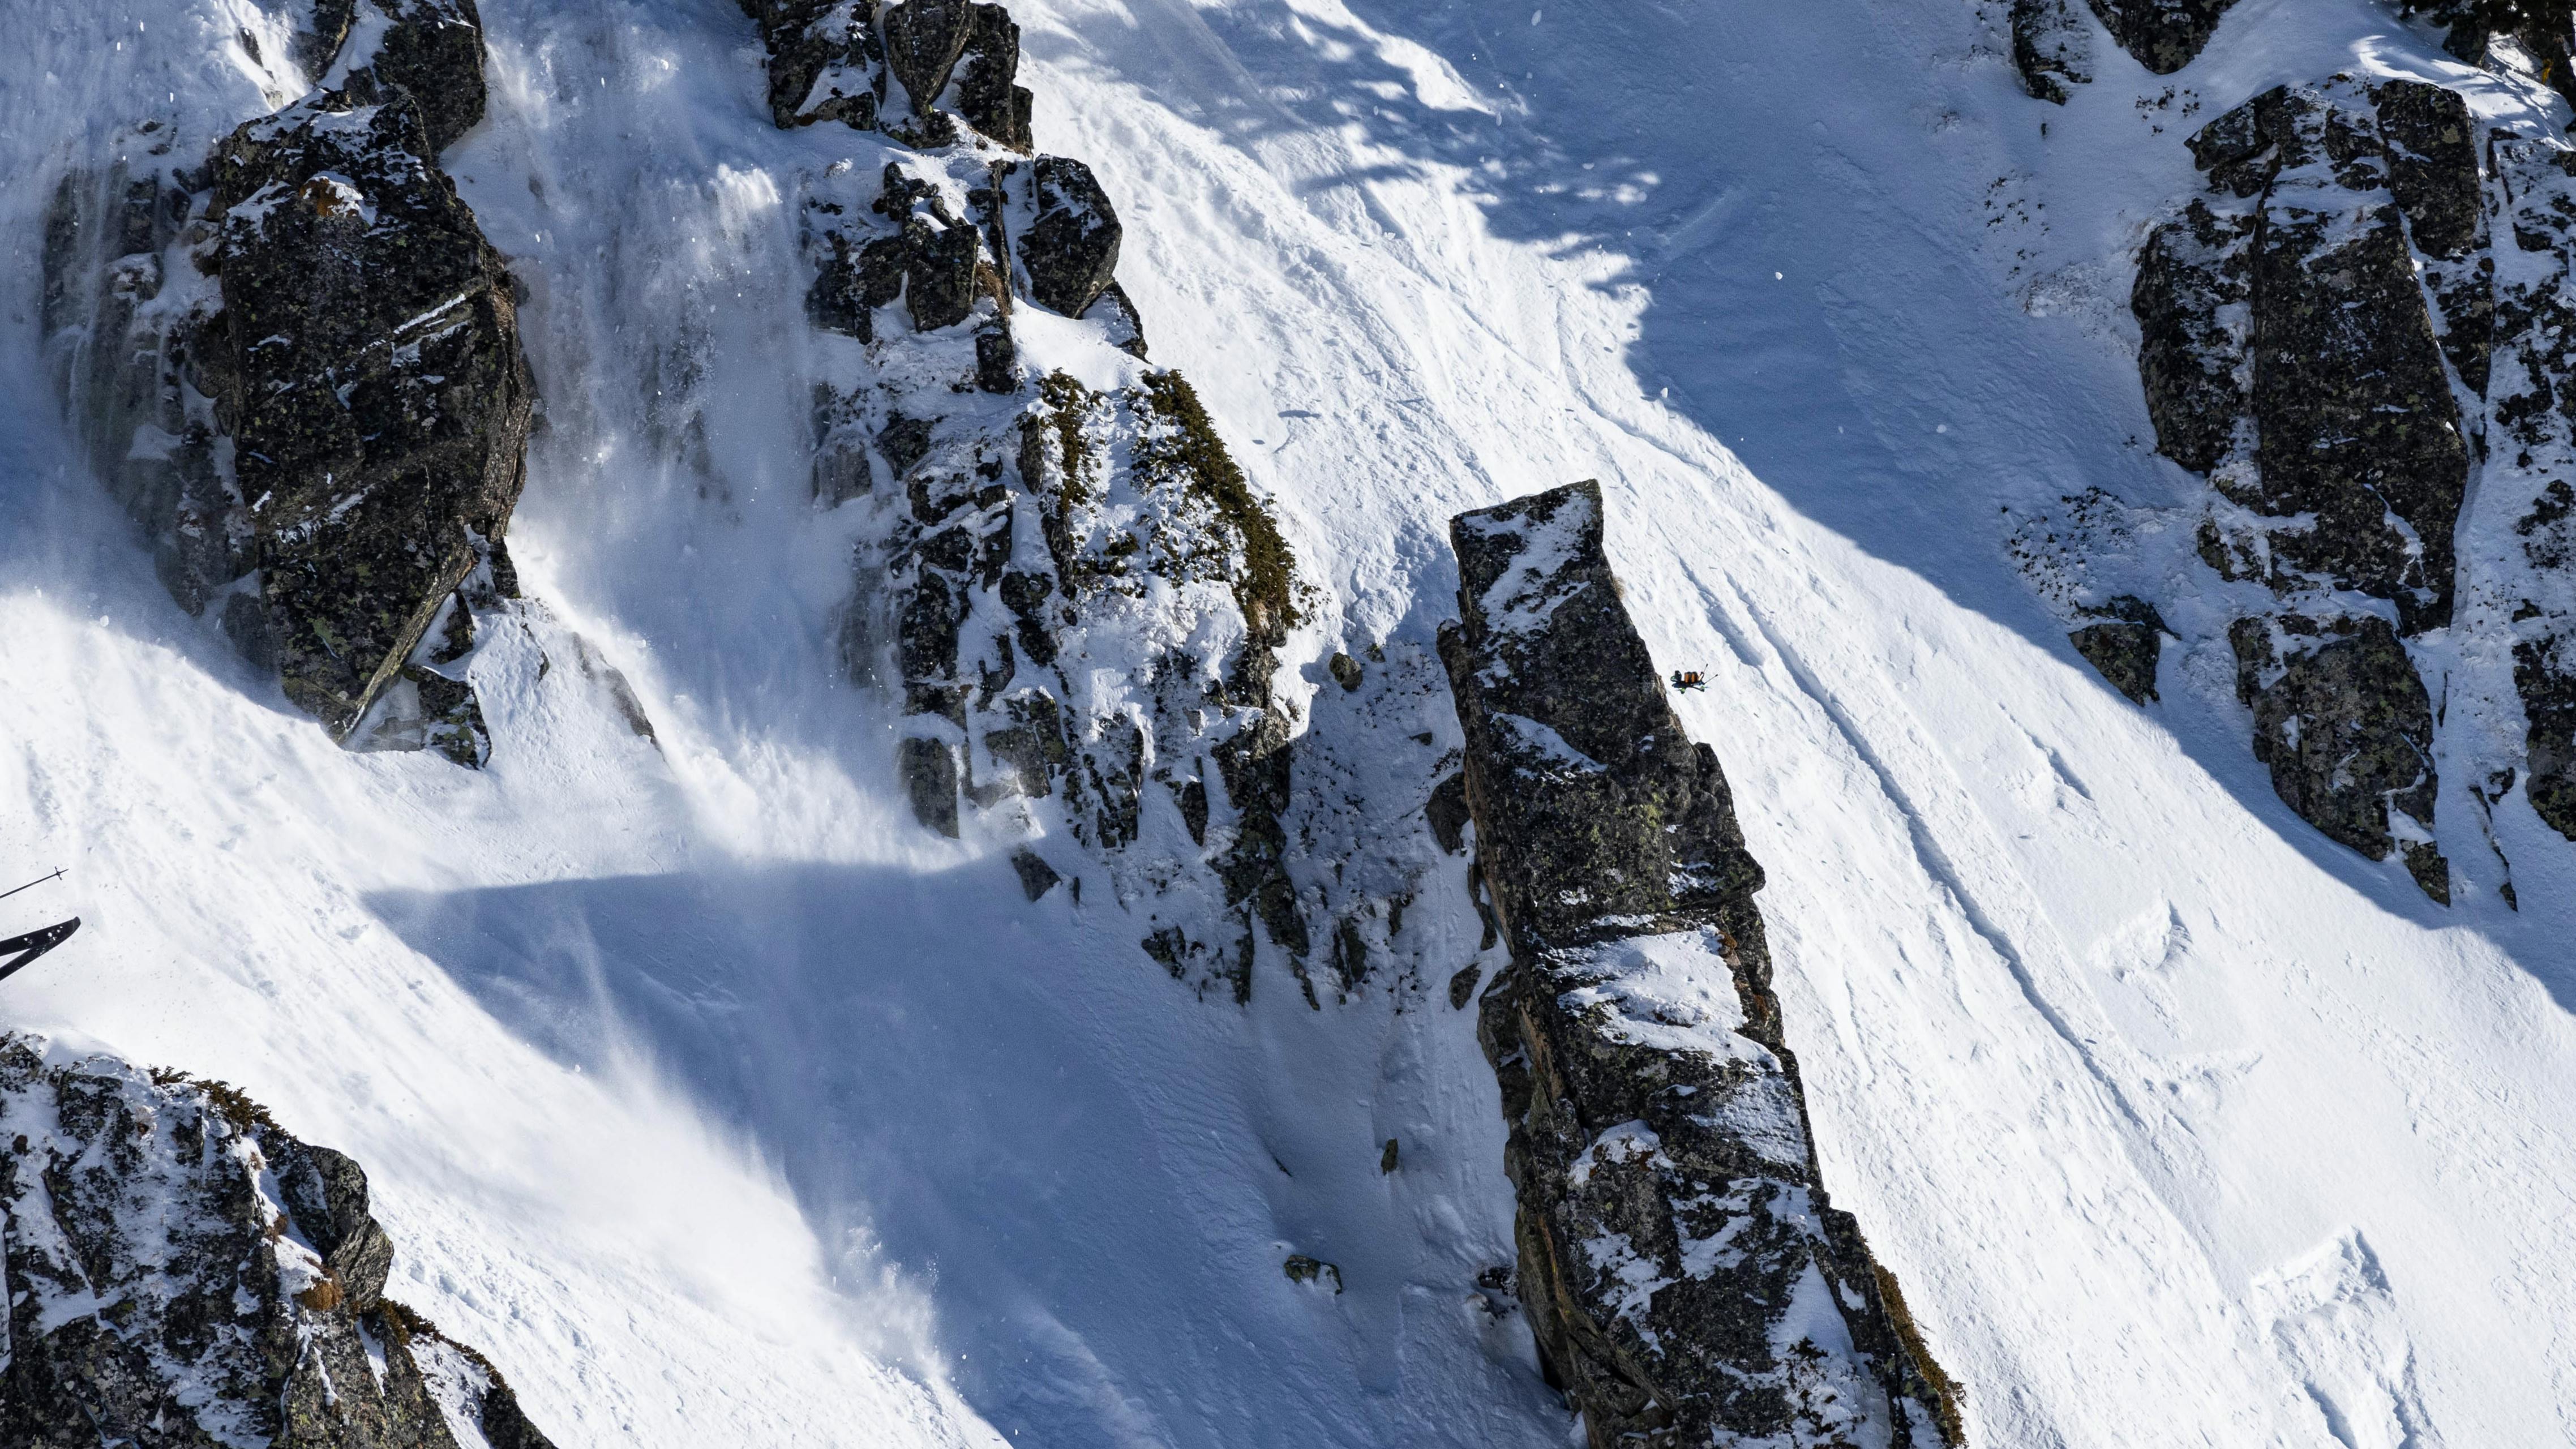 A skier jumps while on a near-vertical mountain.